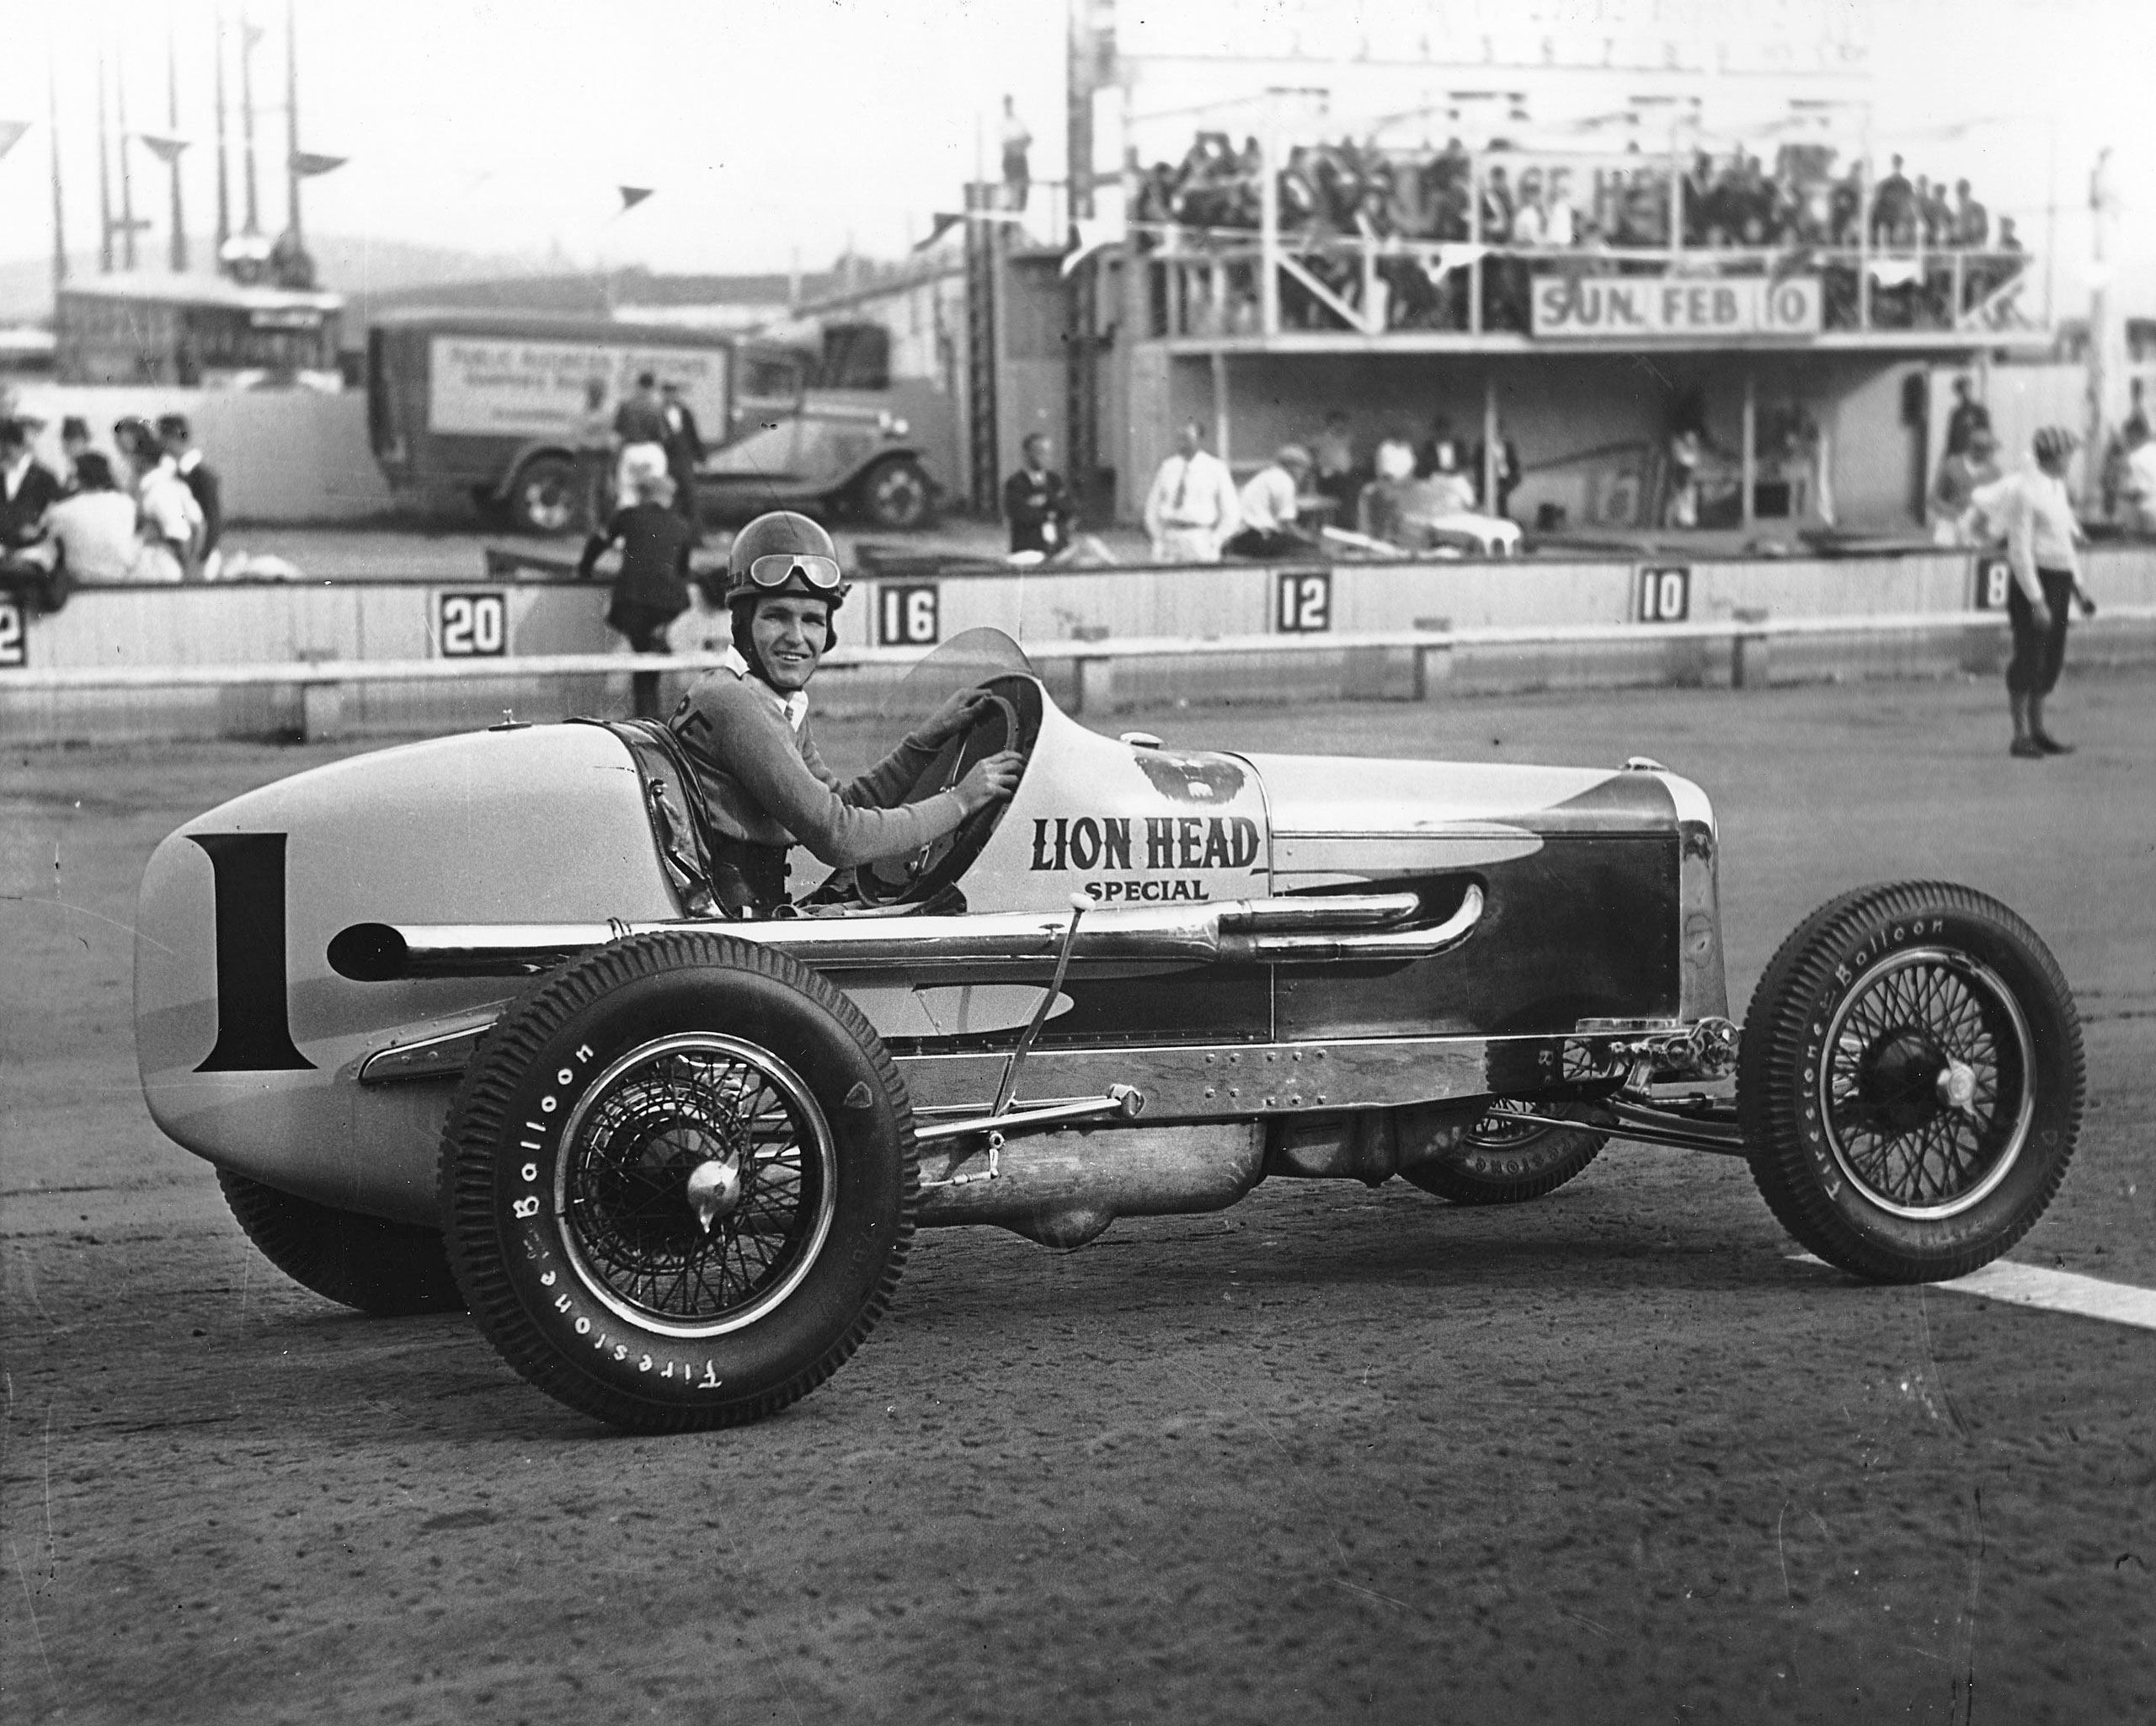 1935: Driver Rex Mays shown here with the Lion Head Special. Mays made 12 starts in the Indianapolis 500 at Indianapolis Motor Speedway, winning the pole position four times. Mays finished second in the race twice, in both 1940 and 1941.